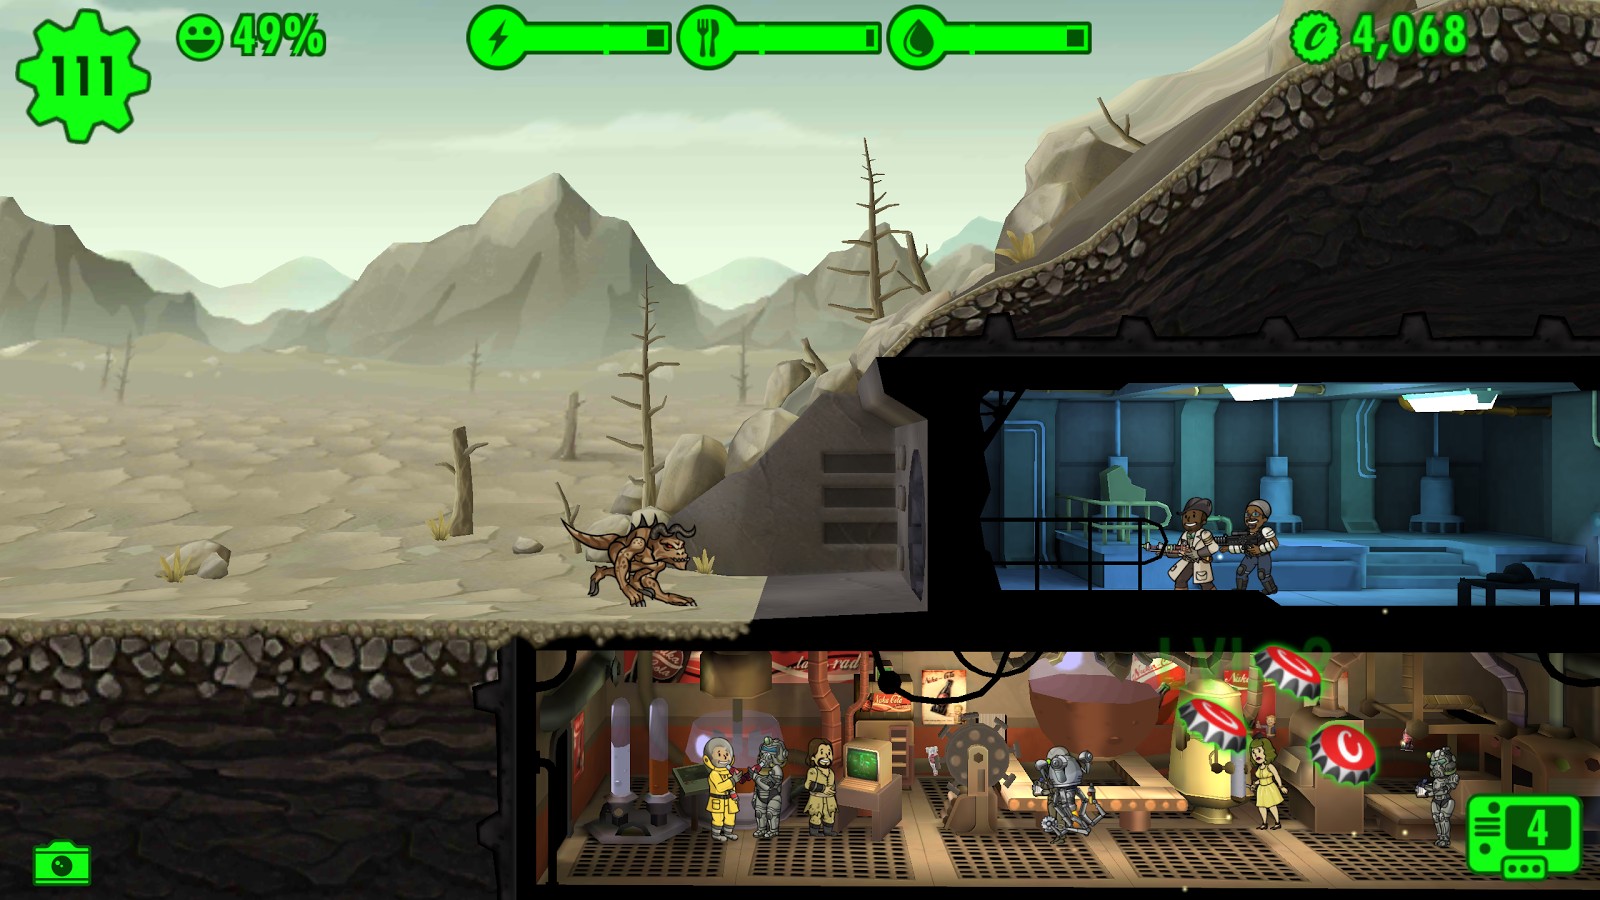 fallout shelter mods pc steam